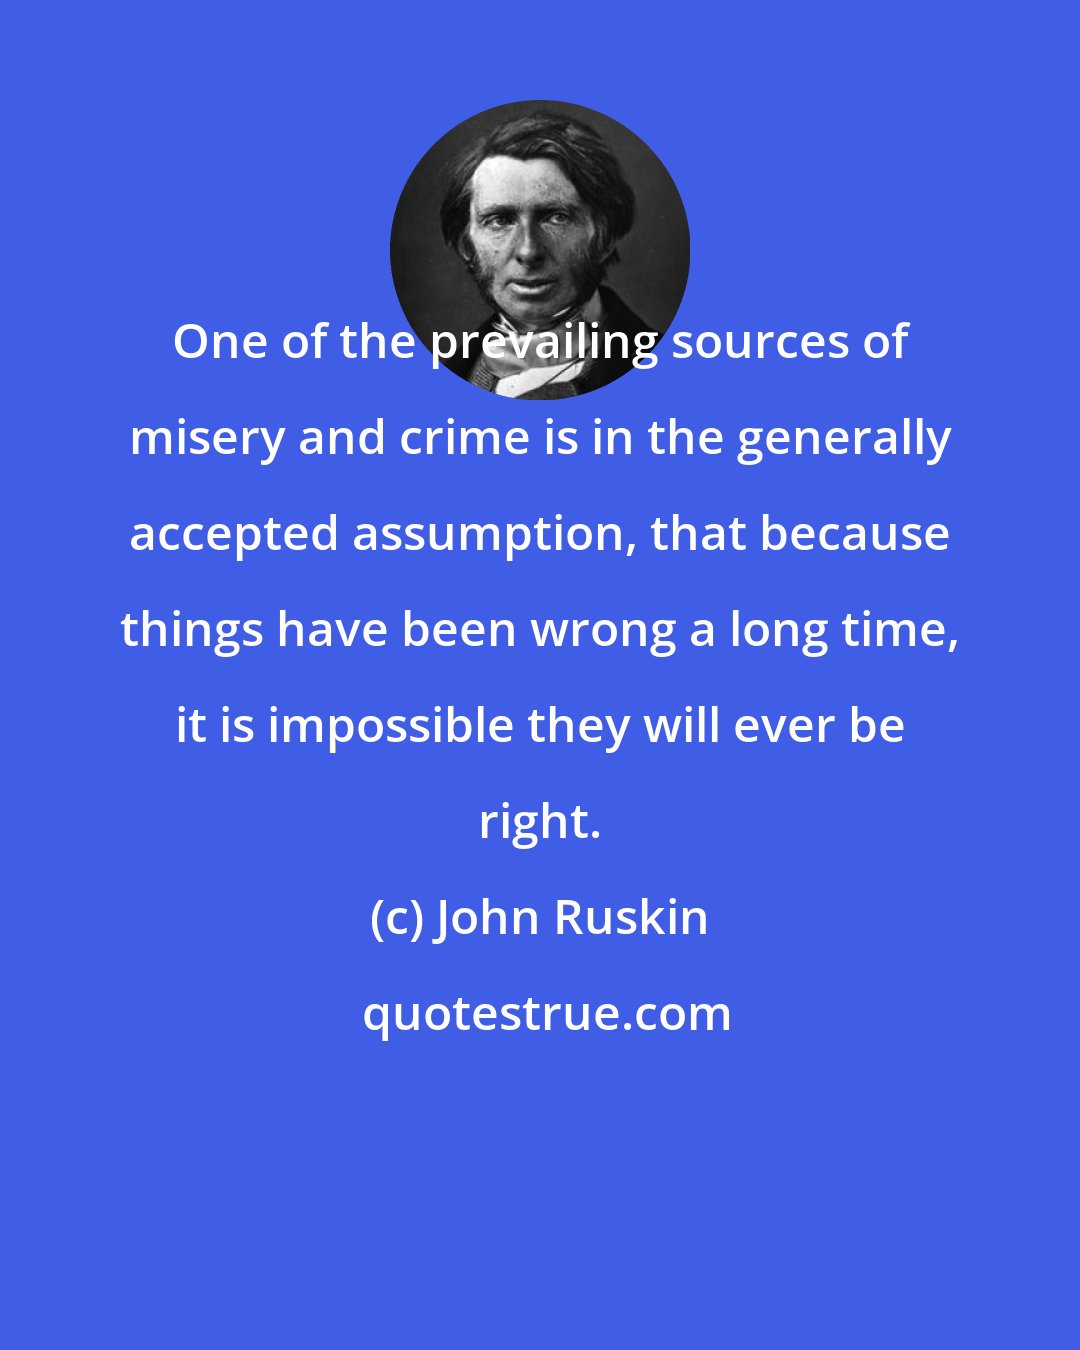 John Ruskin: One of the prevailing sources of misery and crime is in the generally accepted assumption, that because things have been wrong a long time, it is impossible they will ever be right.